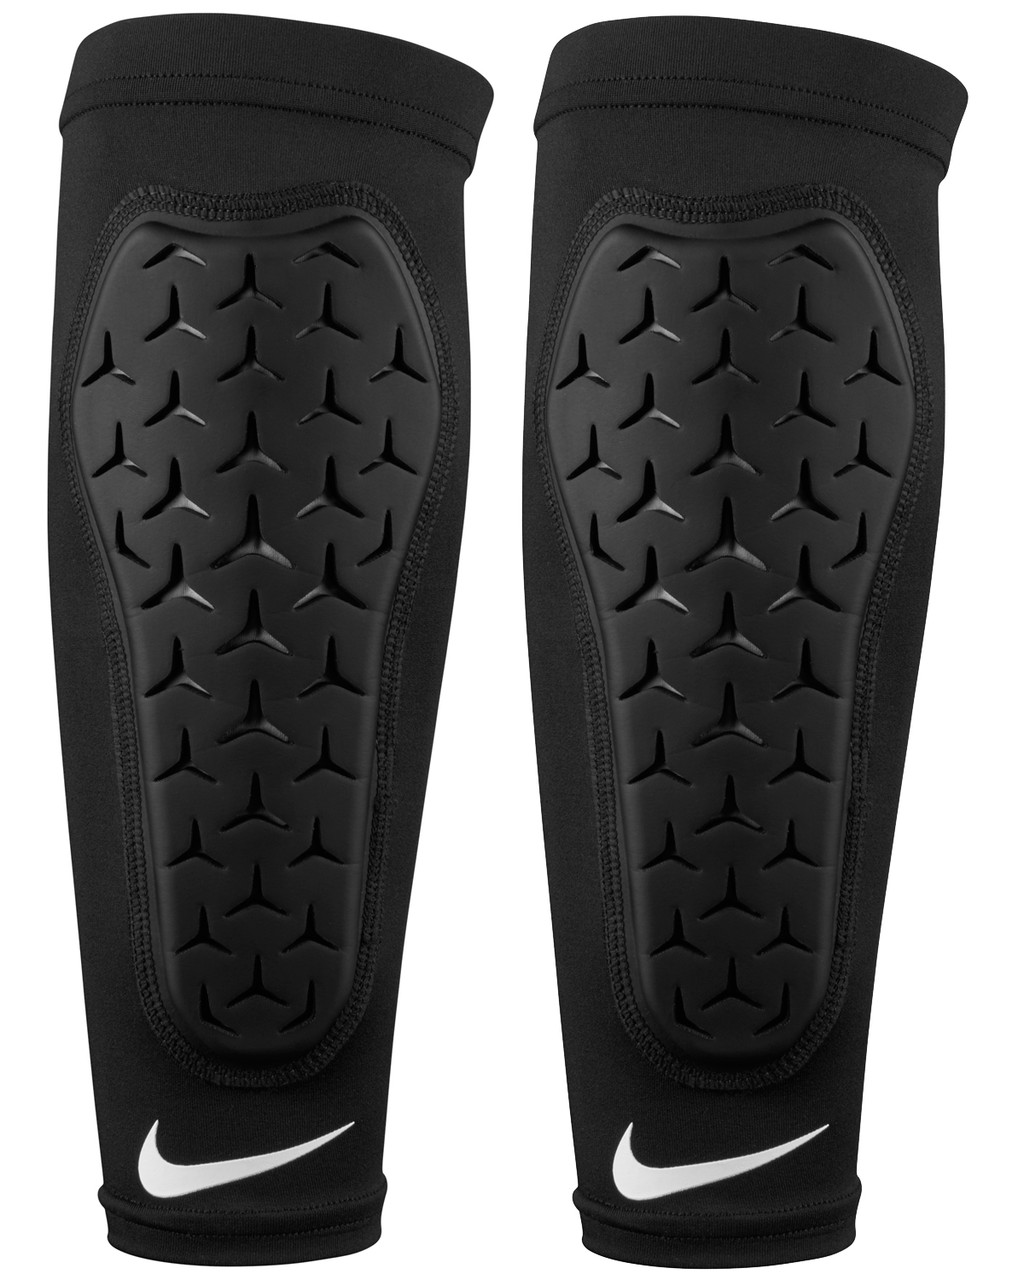 Nike Zoned Support Calf Sleeves - Sports Unlimited